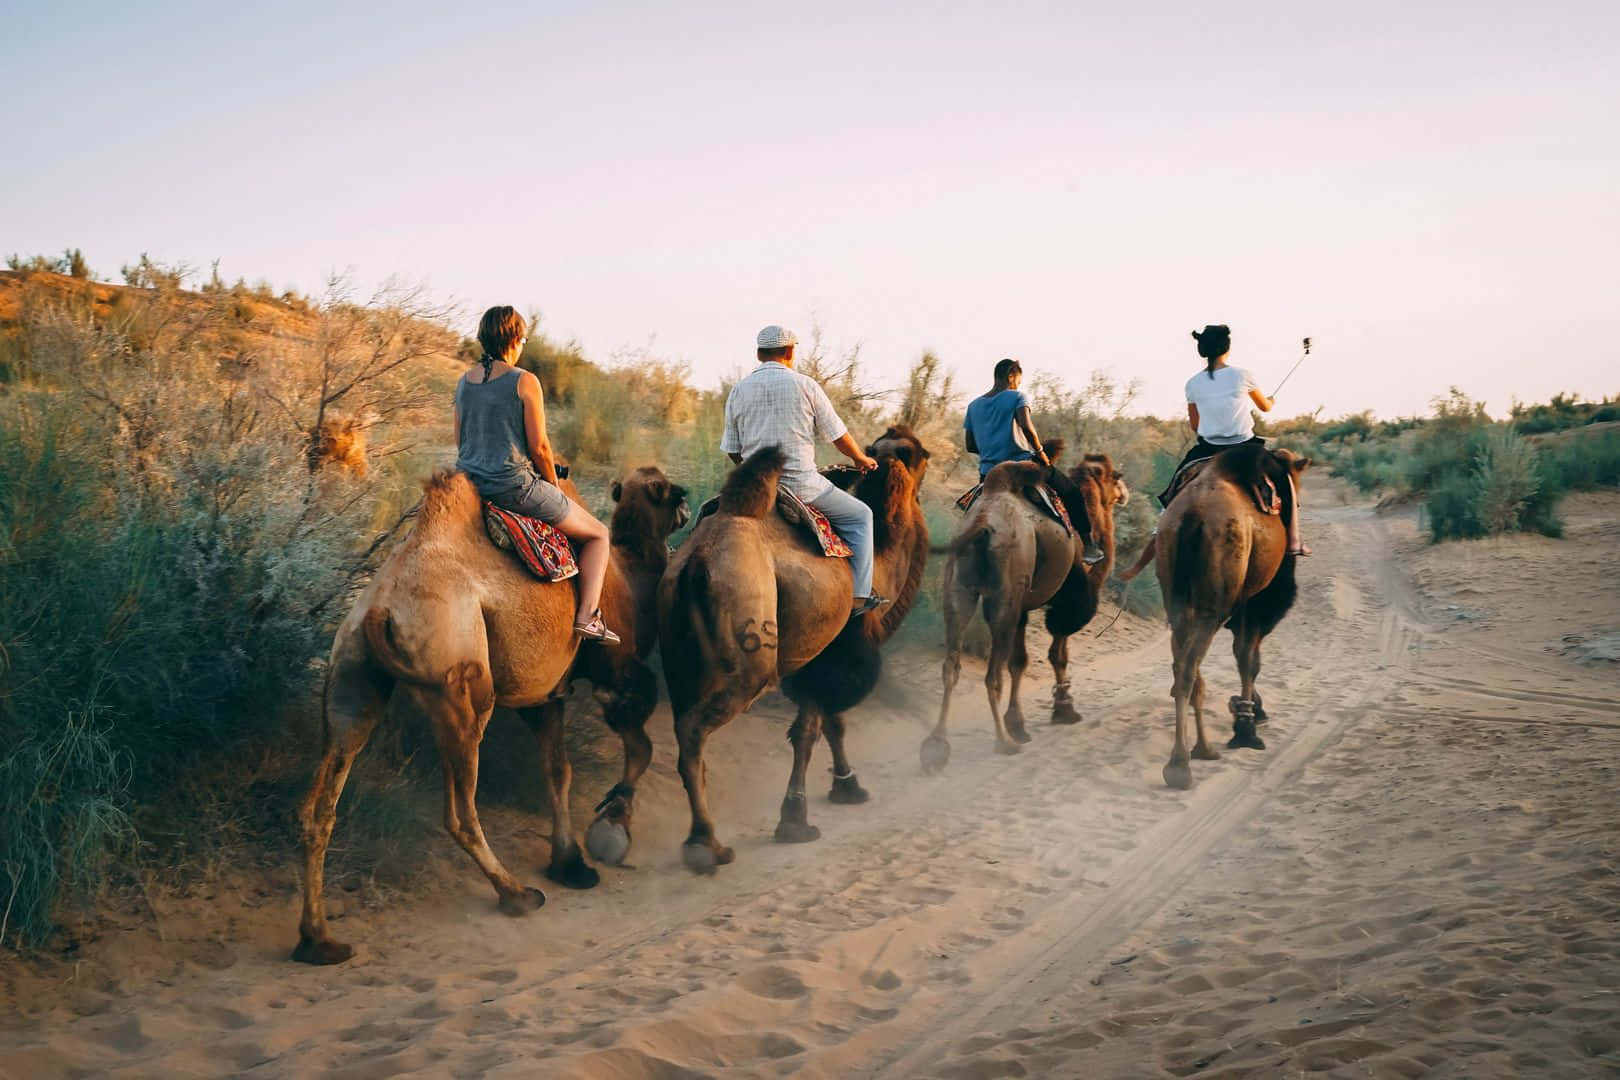 A Group Of People Riding Camels In The Desert